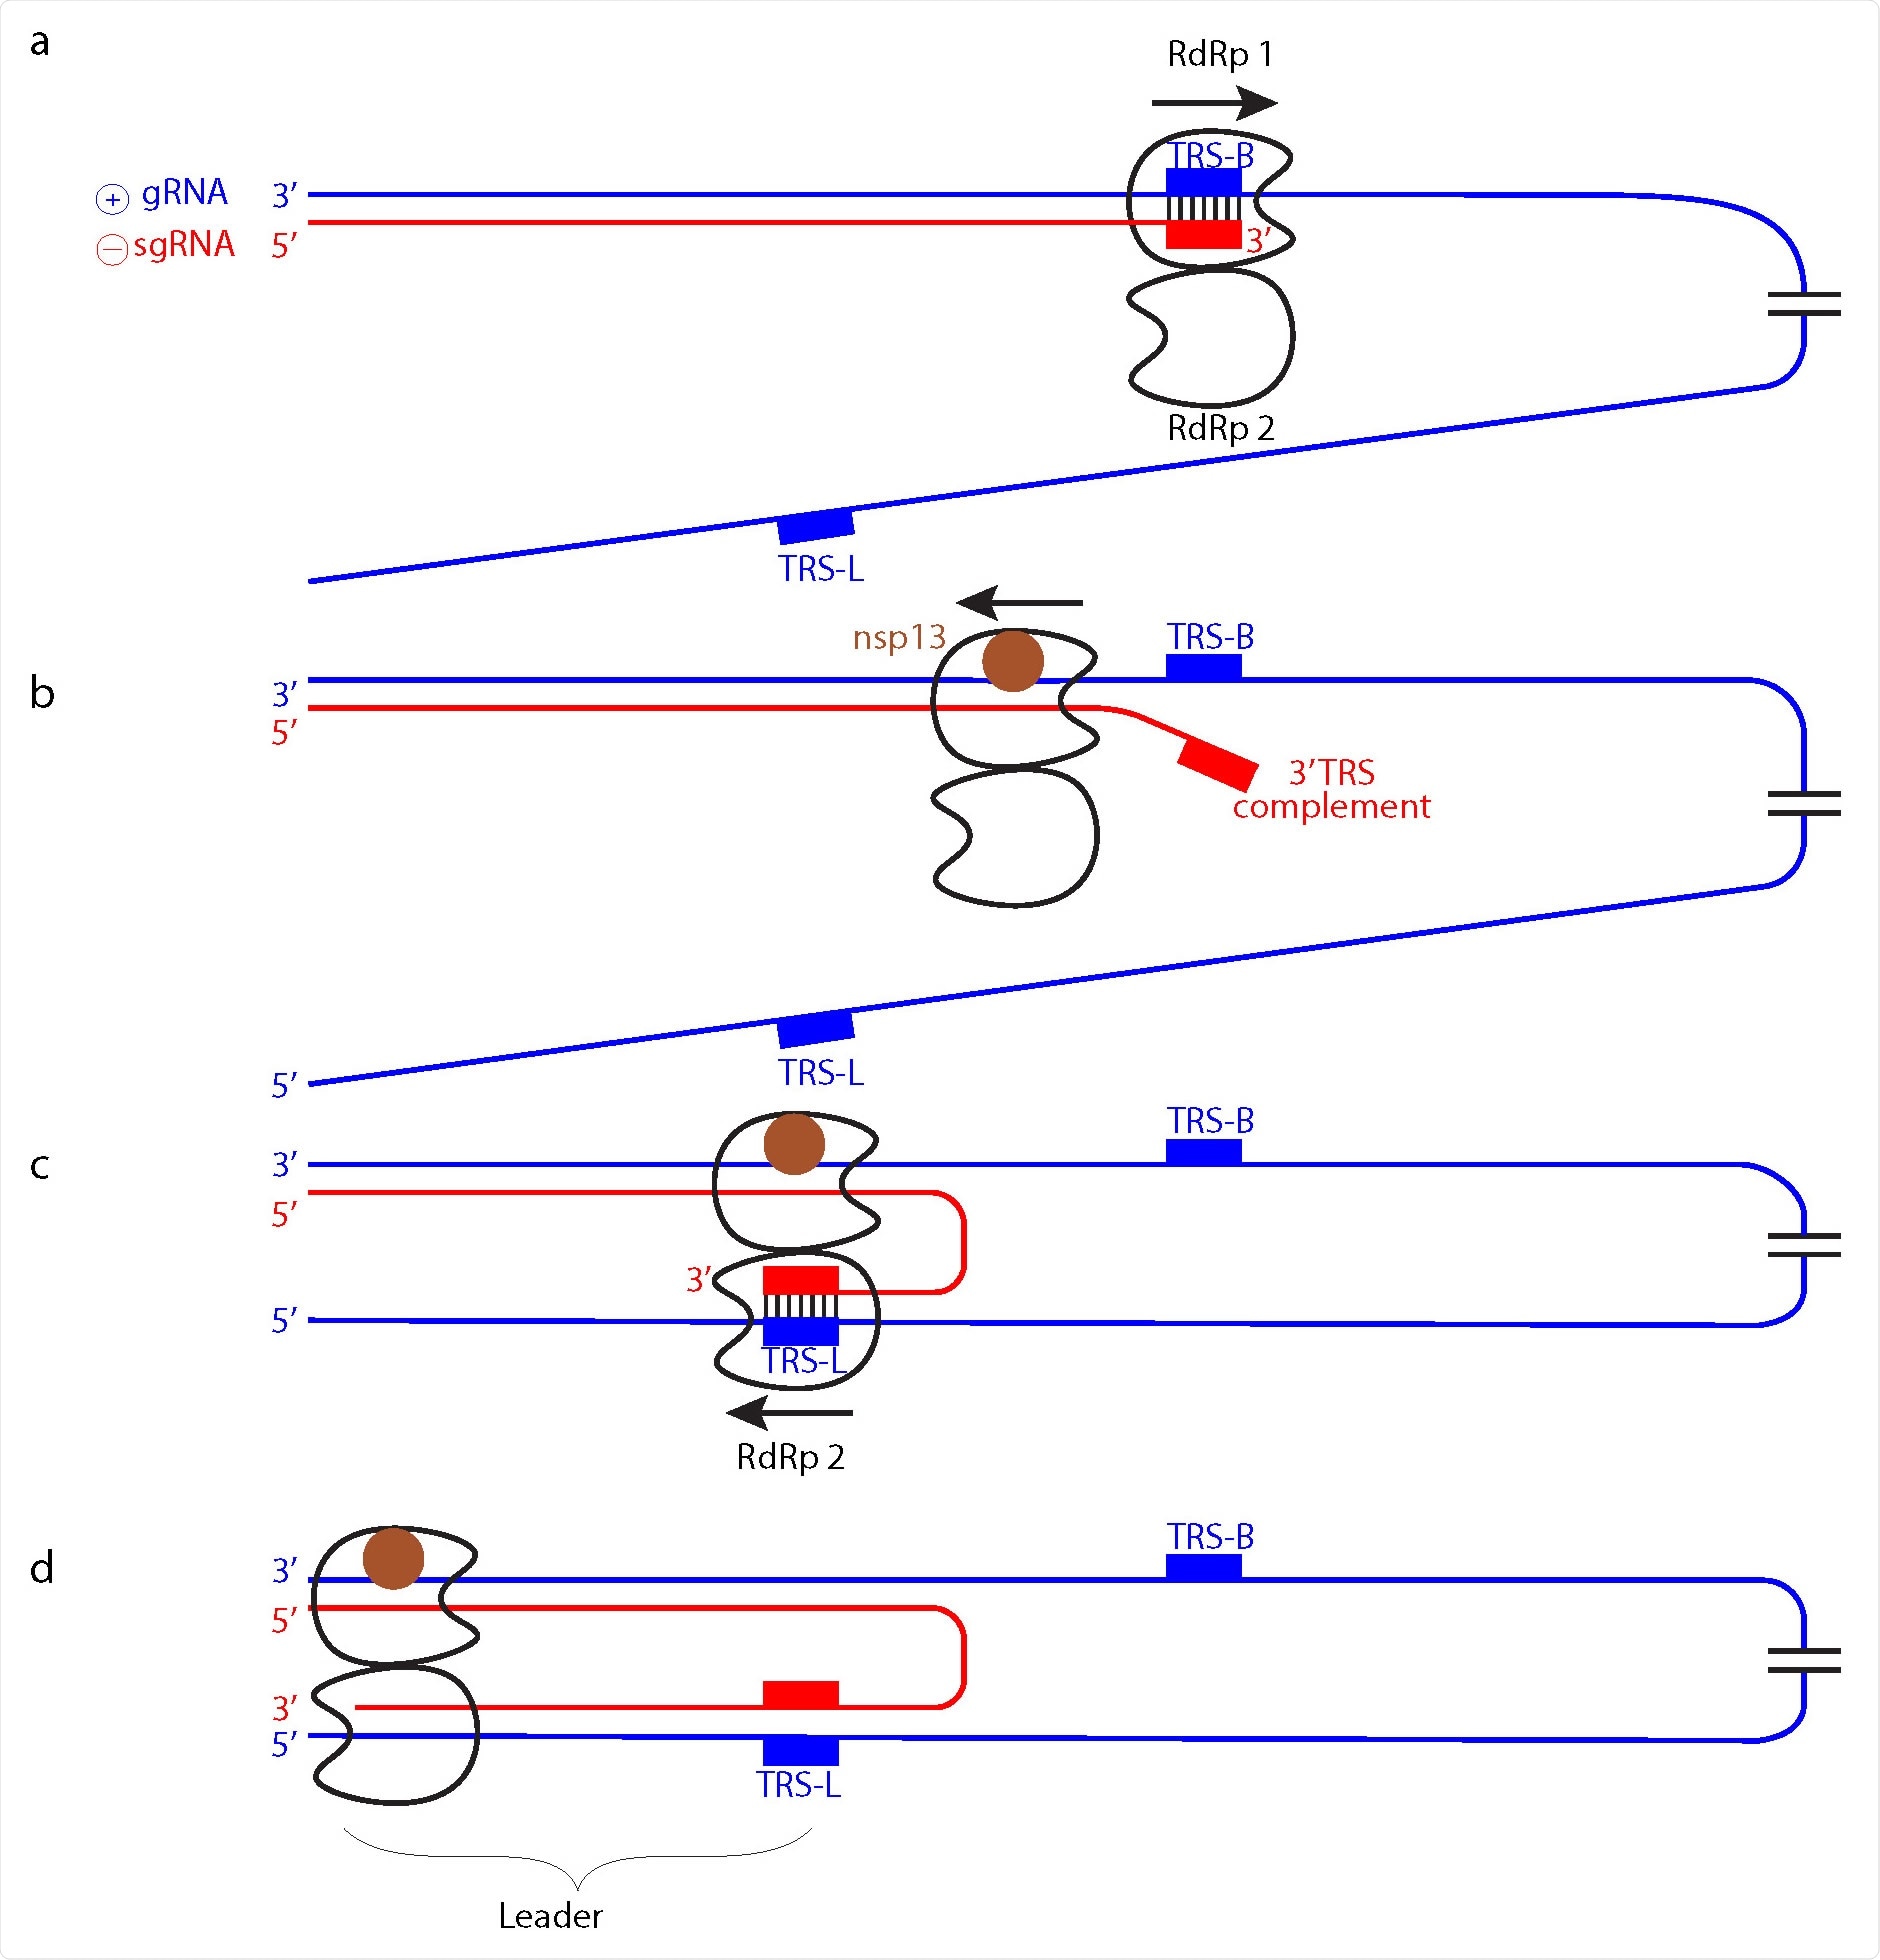 Model of subgenomic RNA production for transcription. a Genomic positive-strand (⊕) RNA (gRNA) is used as template to produce the 5’ region of negative-strand(⊖) sgRNA until TRS-B is reached by the RdRp monomer 1. b Backtracking is mediated by nsp13 helicase and exposes the newly synthesized, complementary TRS sequence. c The complementary sequence in sgRNA can pair with the downstream TRS-L in gRNA and is then loaded into RdRp monomer 2. d RdRp 2 then completes ⊖ sgRNA synthesis while RdRp 1 backtracks further.